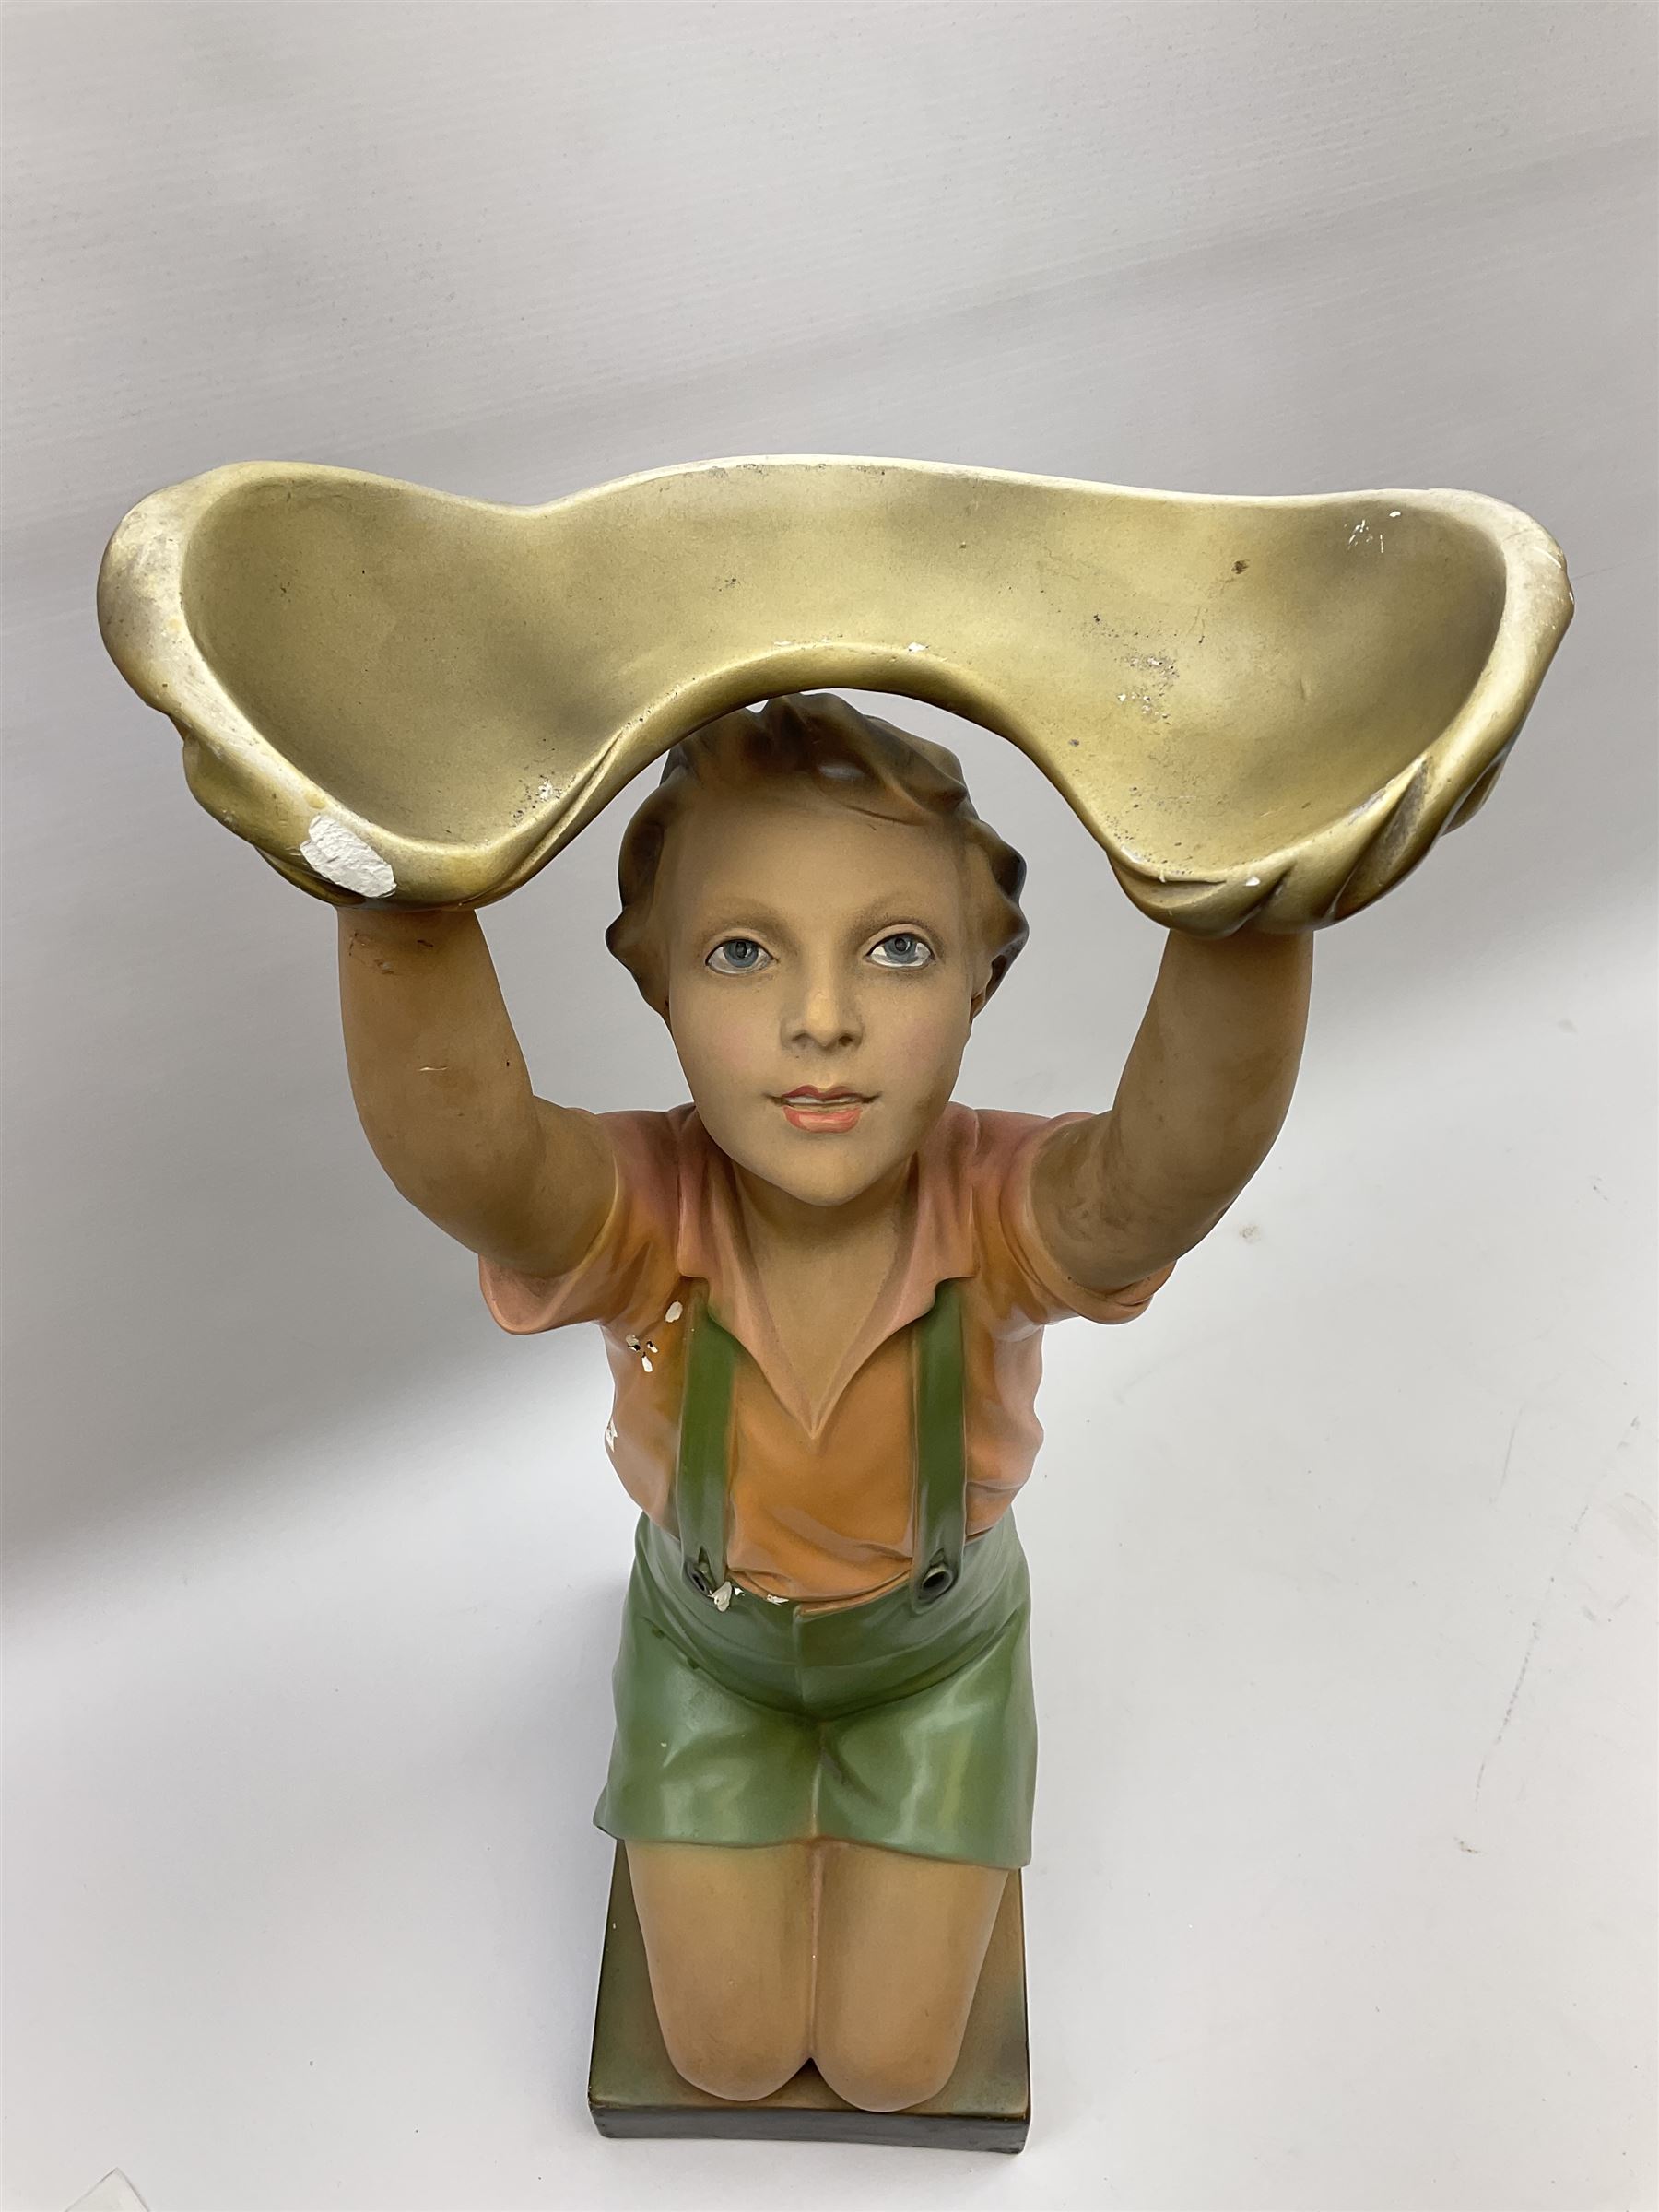 Art Deco plaster figure modelled as a young boy kneeling with his arms above his head holding a dish - Image 3 of 4